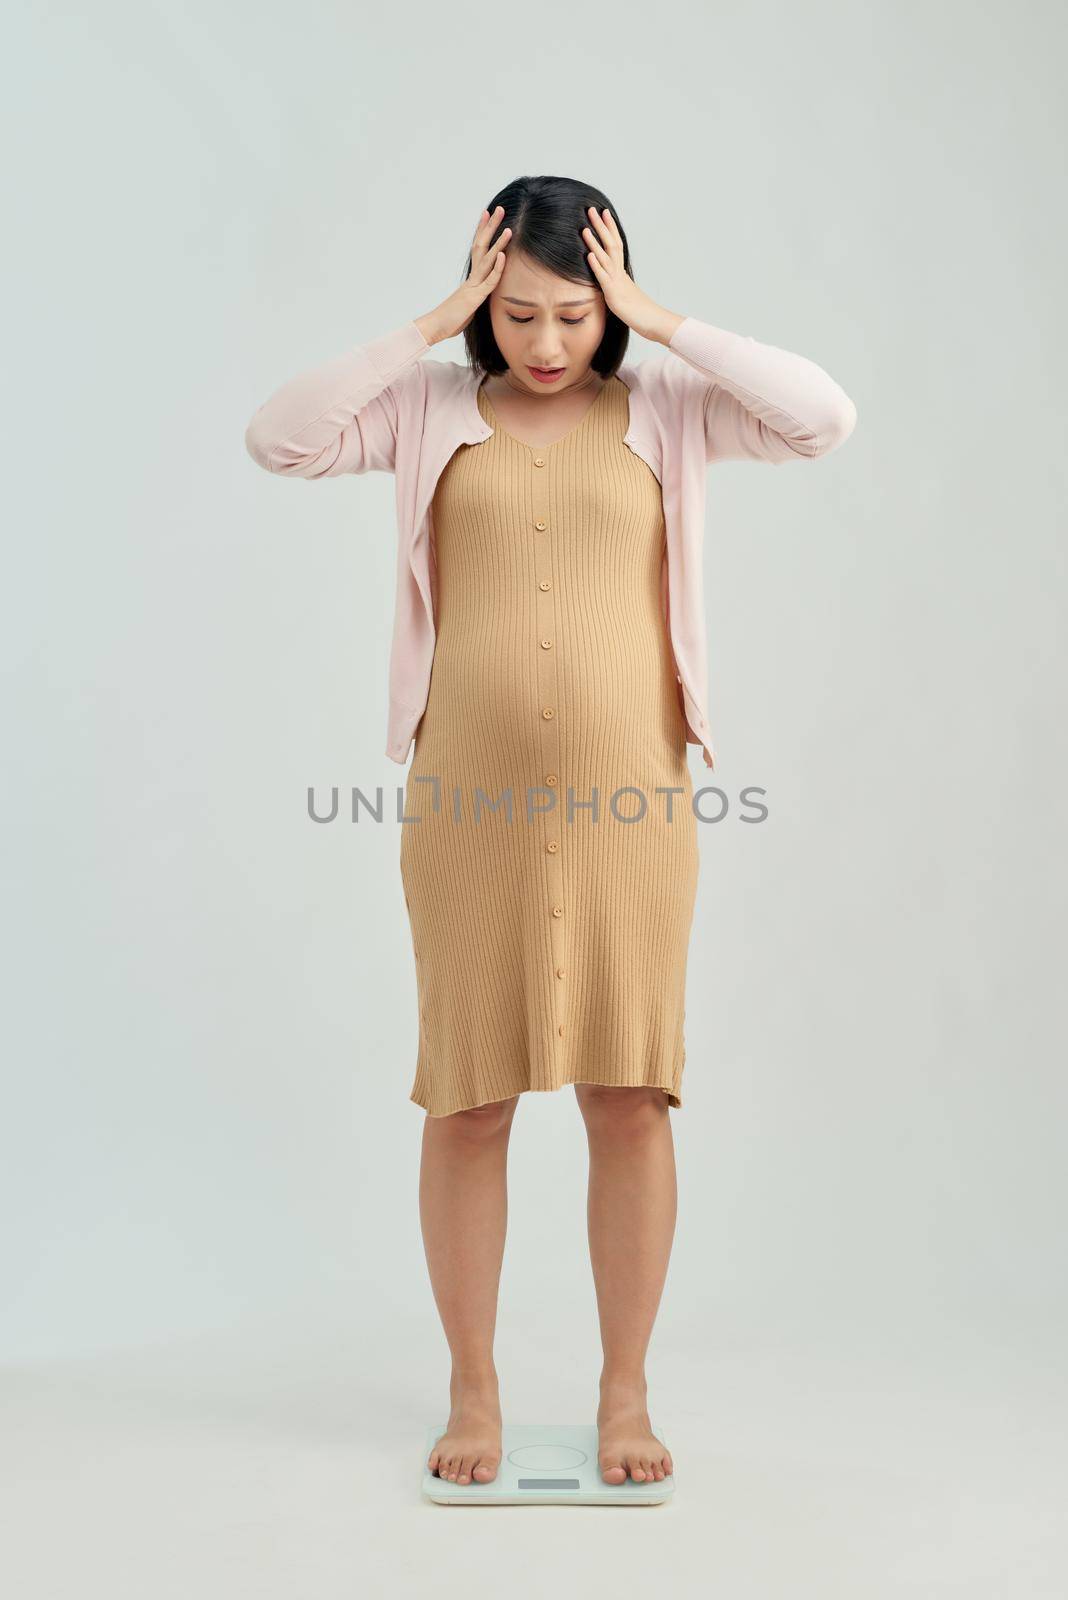 pregnant woman standing on a weight scale  by makidotvn